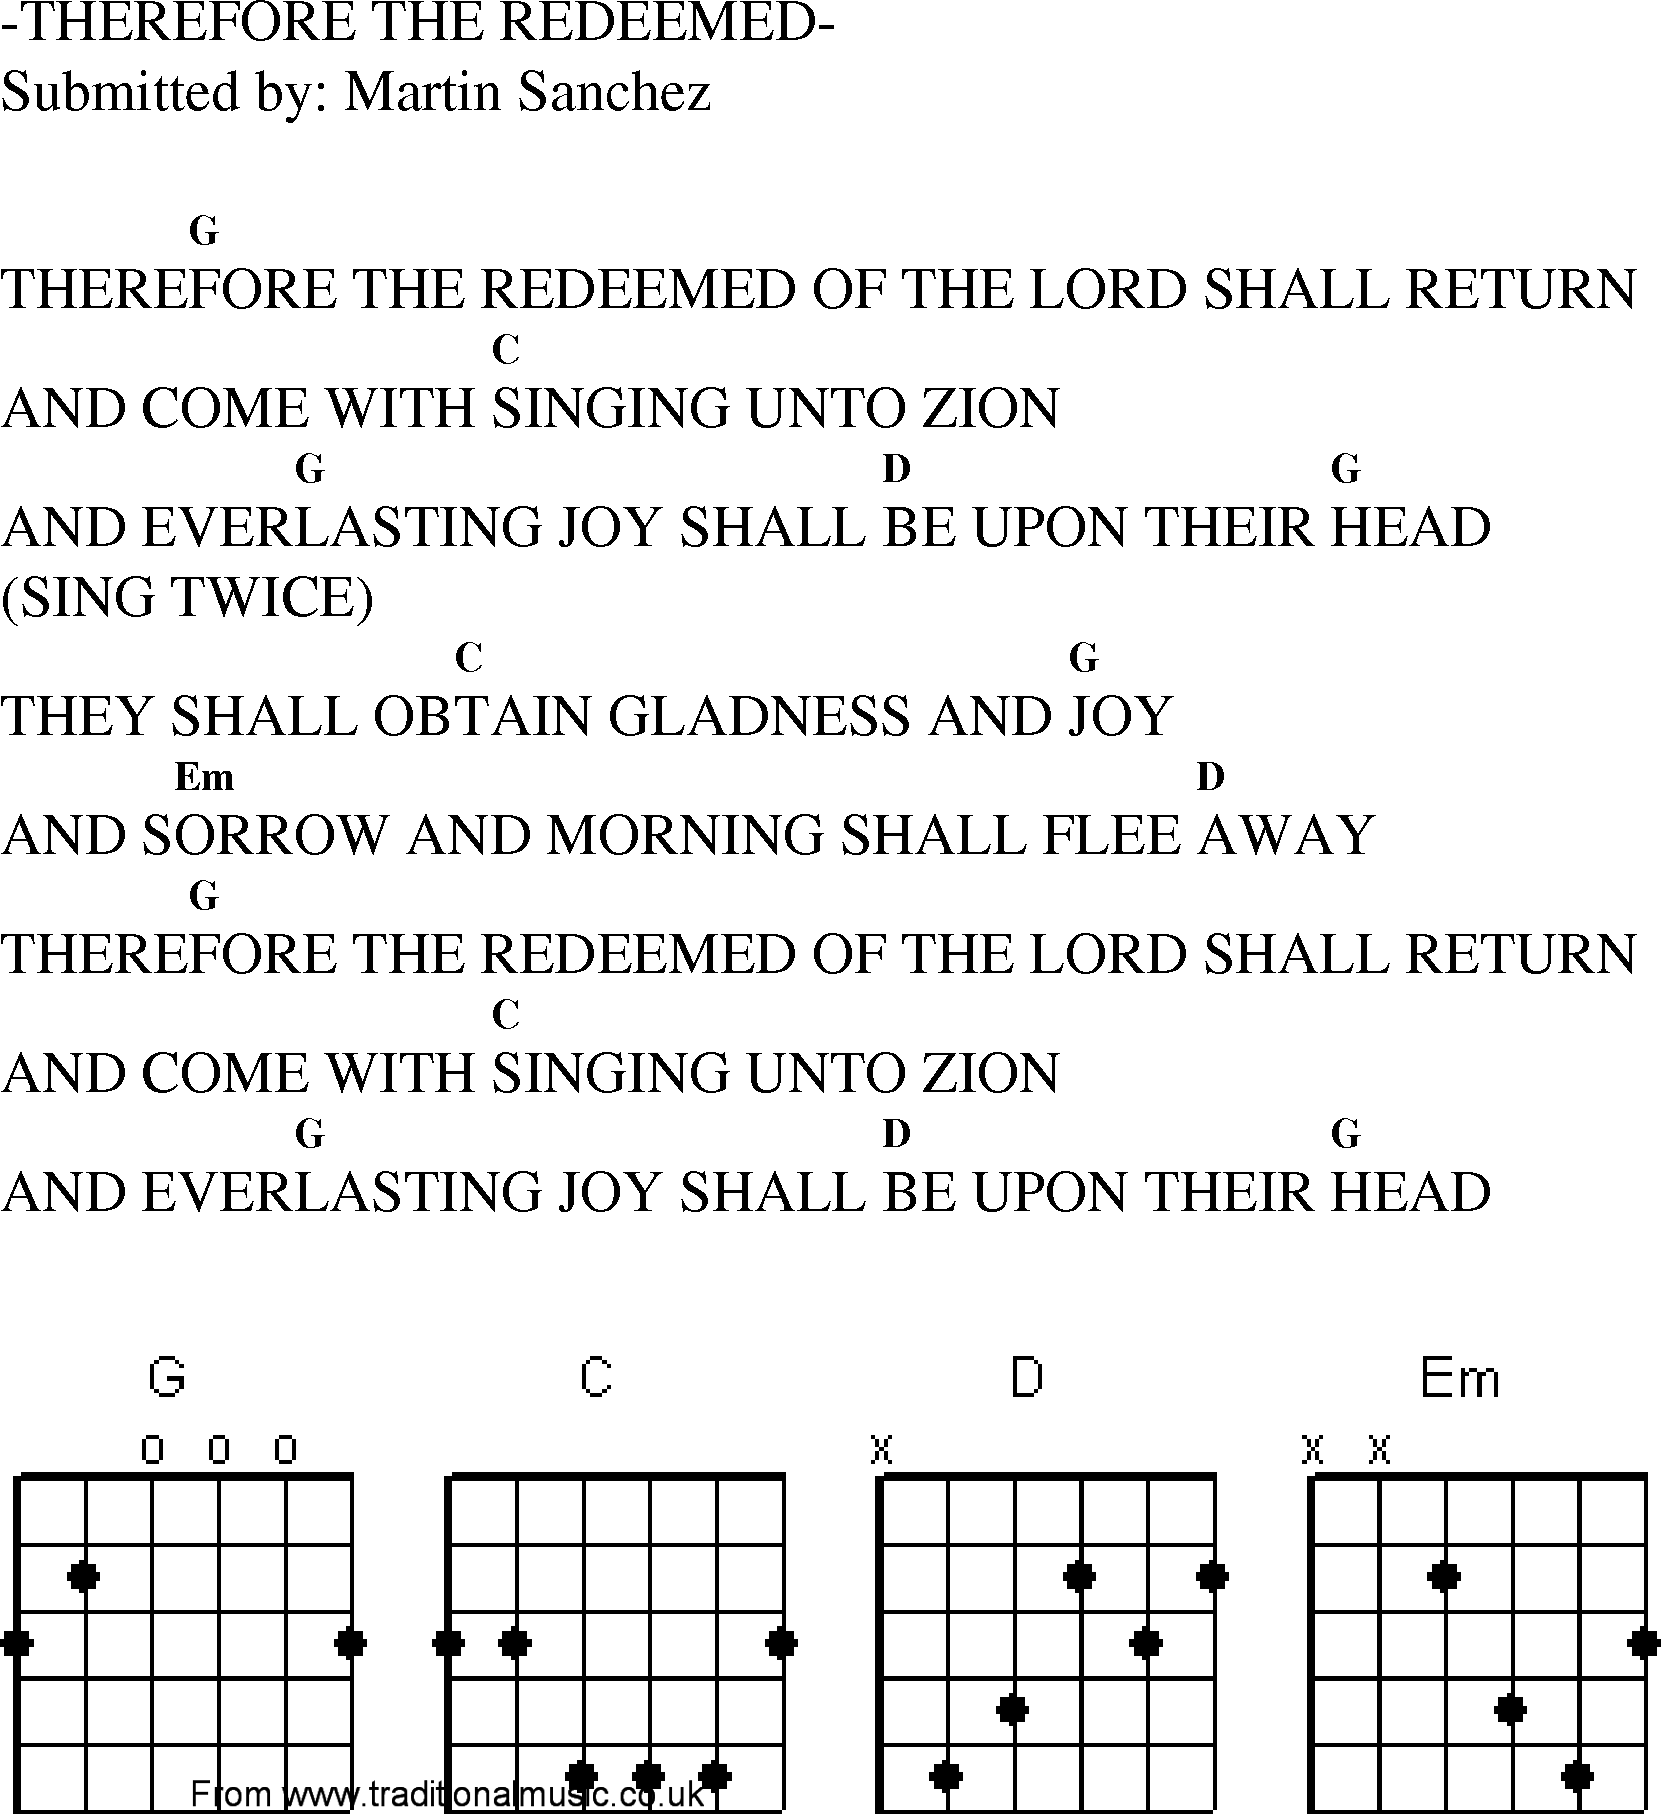 Gospel Song: therefore_the_redeemed, lyrics and chords.